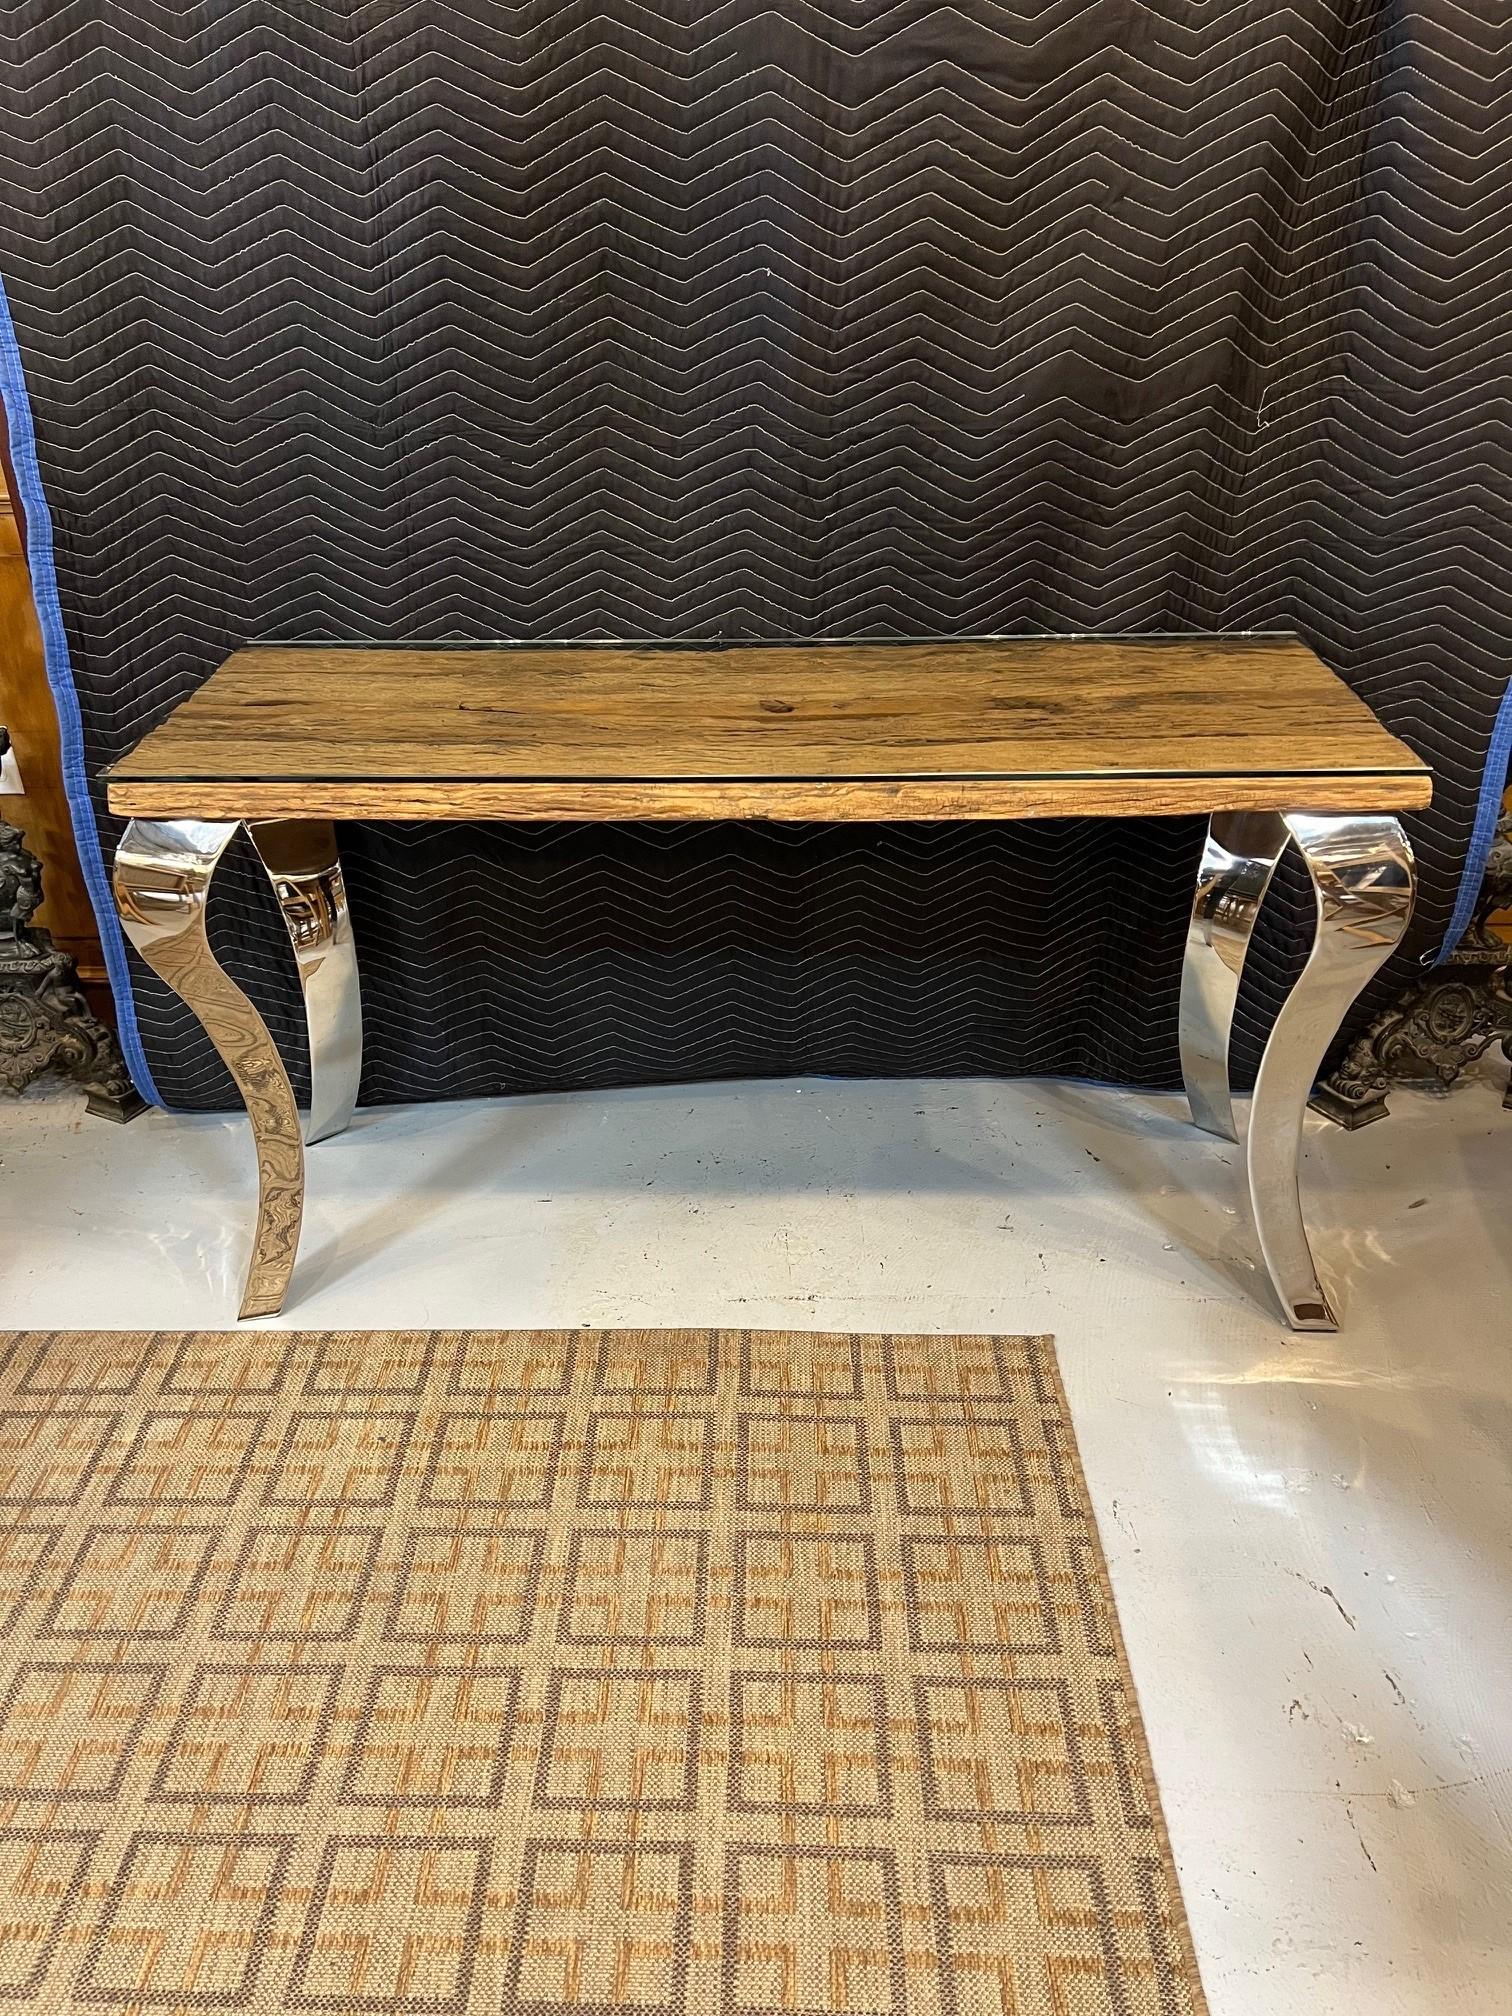 Beautiful reclaimed wood console table with a glass top and large nickel plated cabriole legs. The console table was made in India from reclaimed wood salvaged from India's railroad. The top is attached to four large plated cabriole legs. Looks